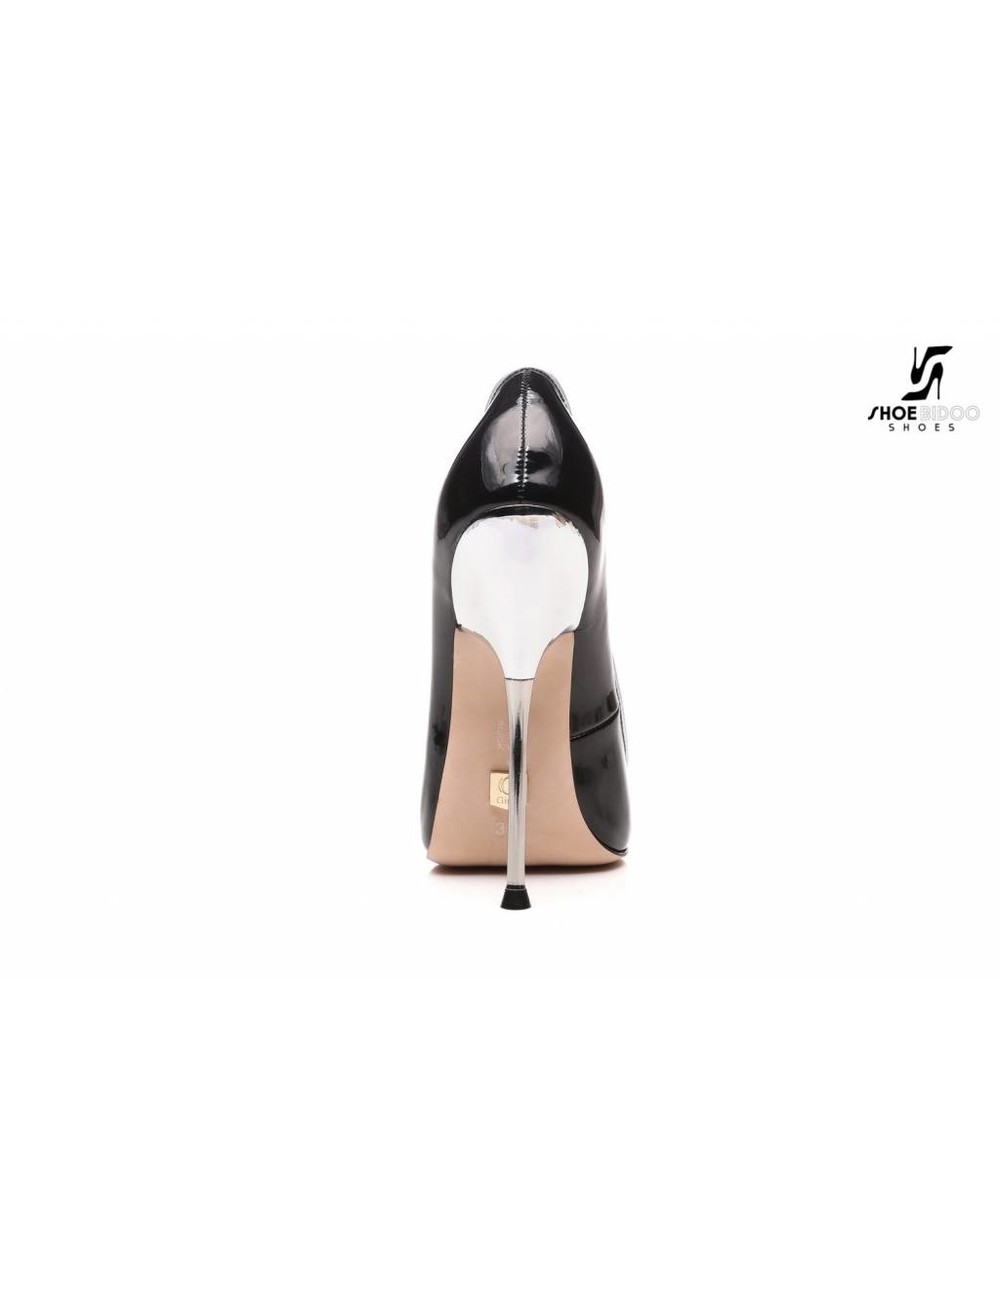 Giaro Black patent pumps with ultra high silver metal heels